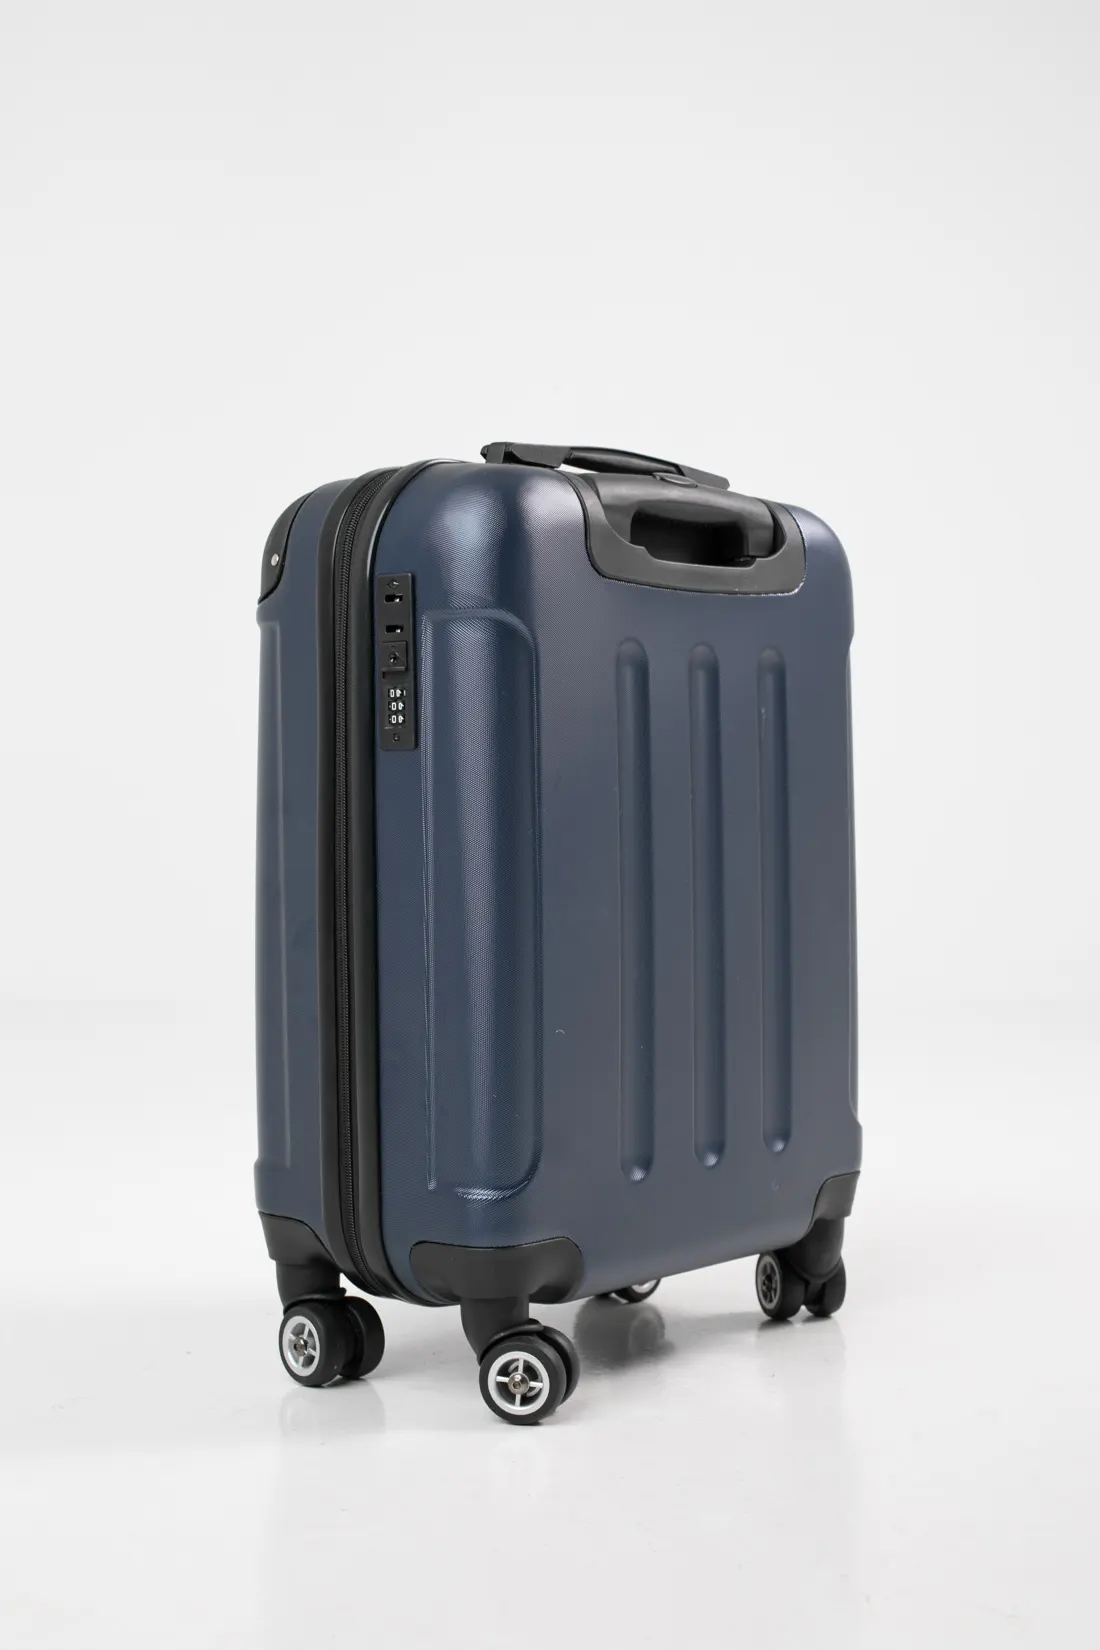 CUSTER CABIN SUITCASE - NAVY BLUE